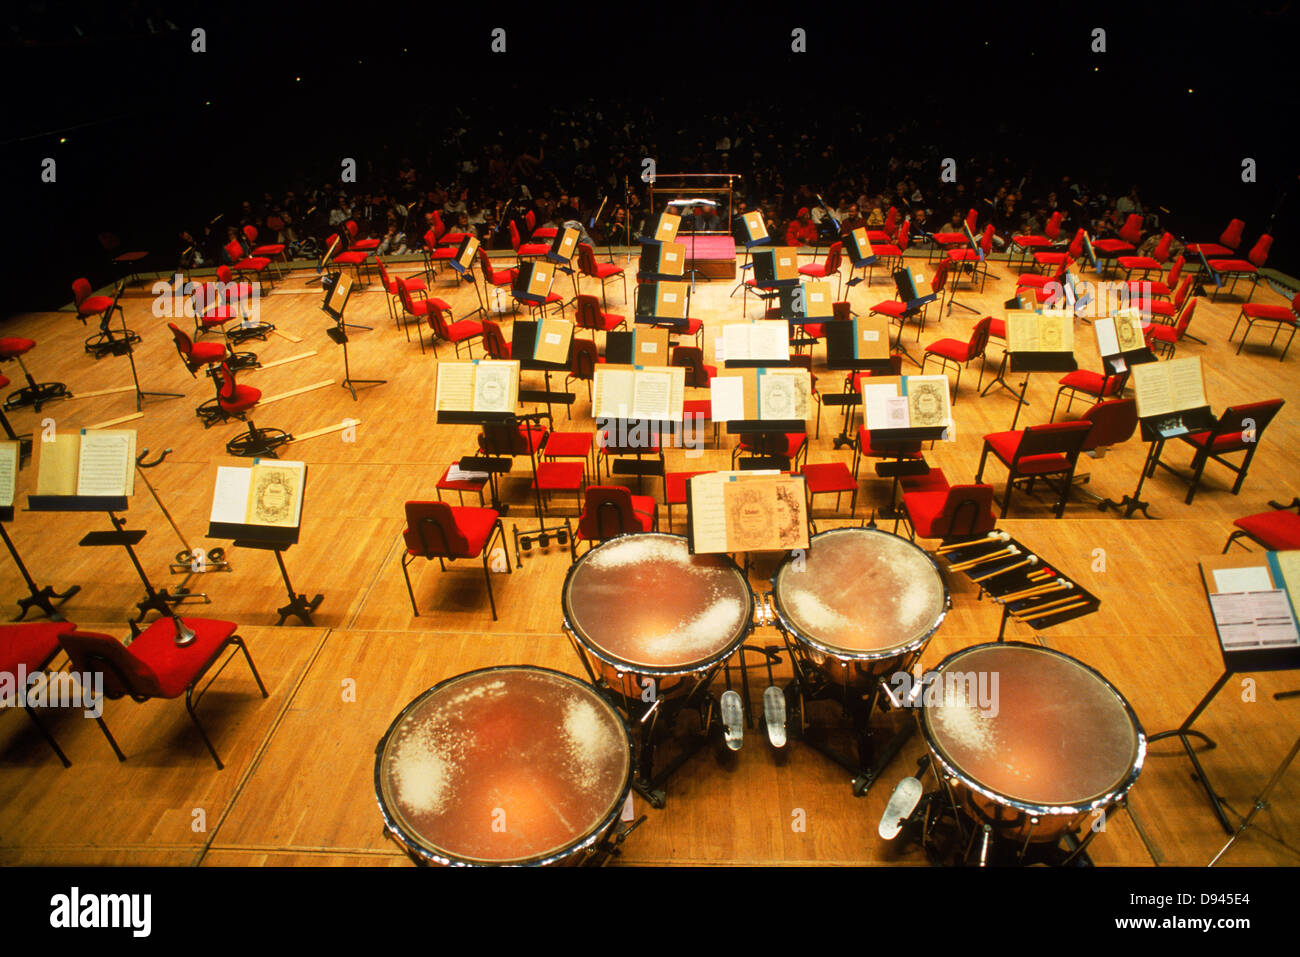 Stockholm Philharmonic Orchestra with music stands and sheets and empty chairs before performance at Stockholm Concert House Stock Photo